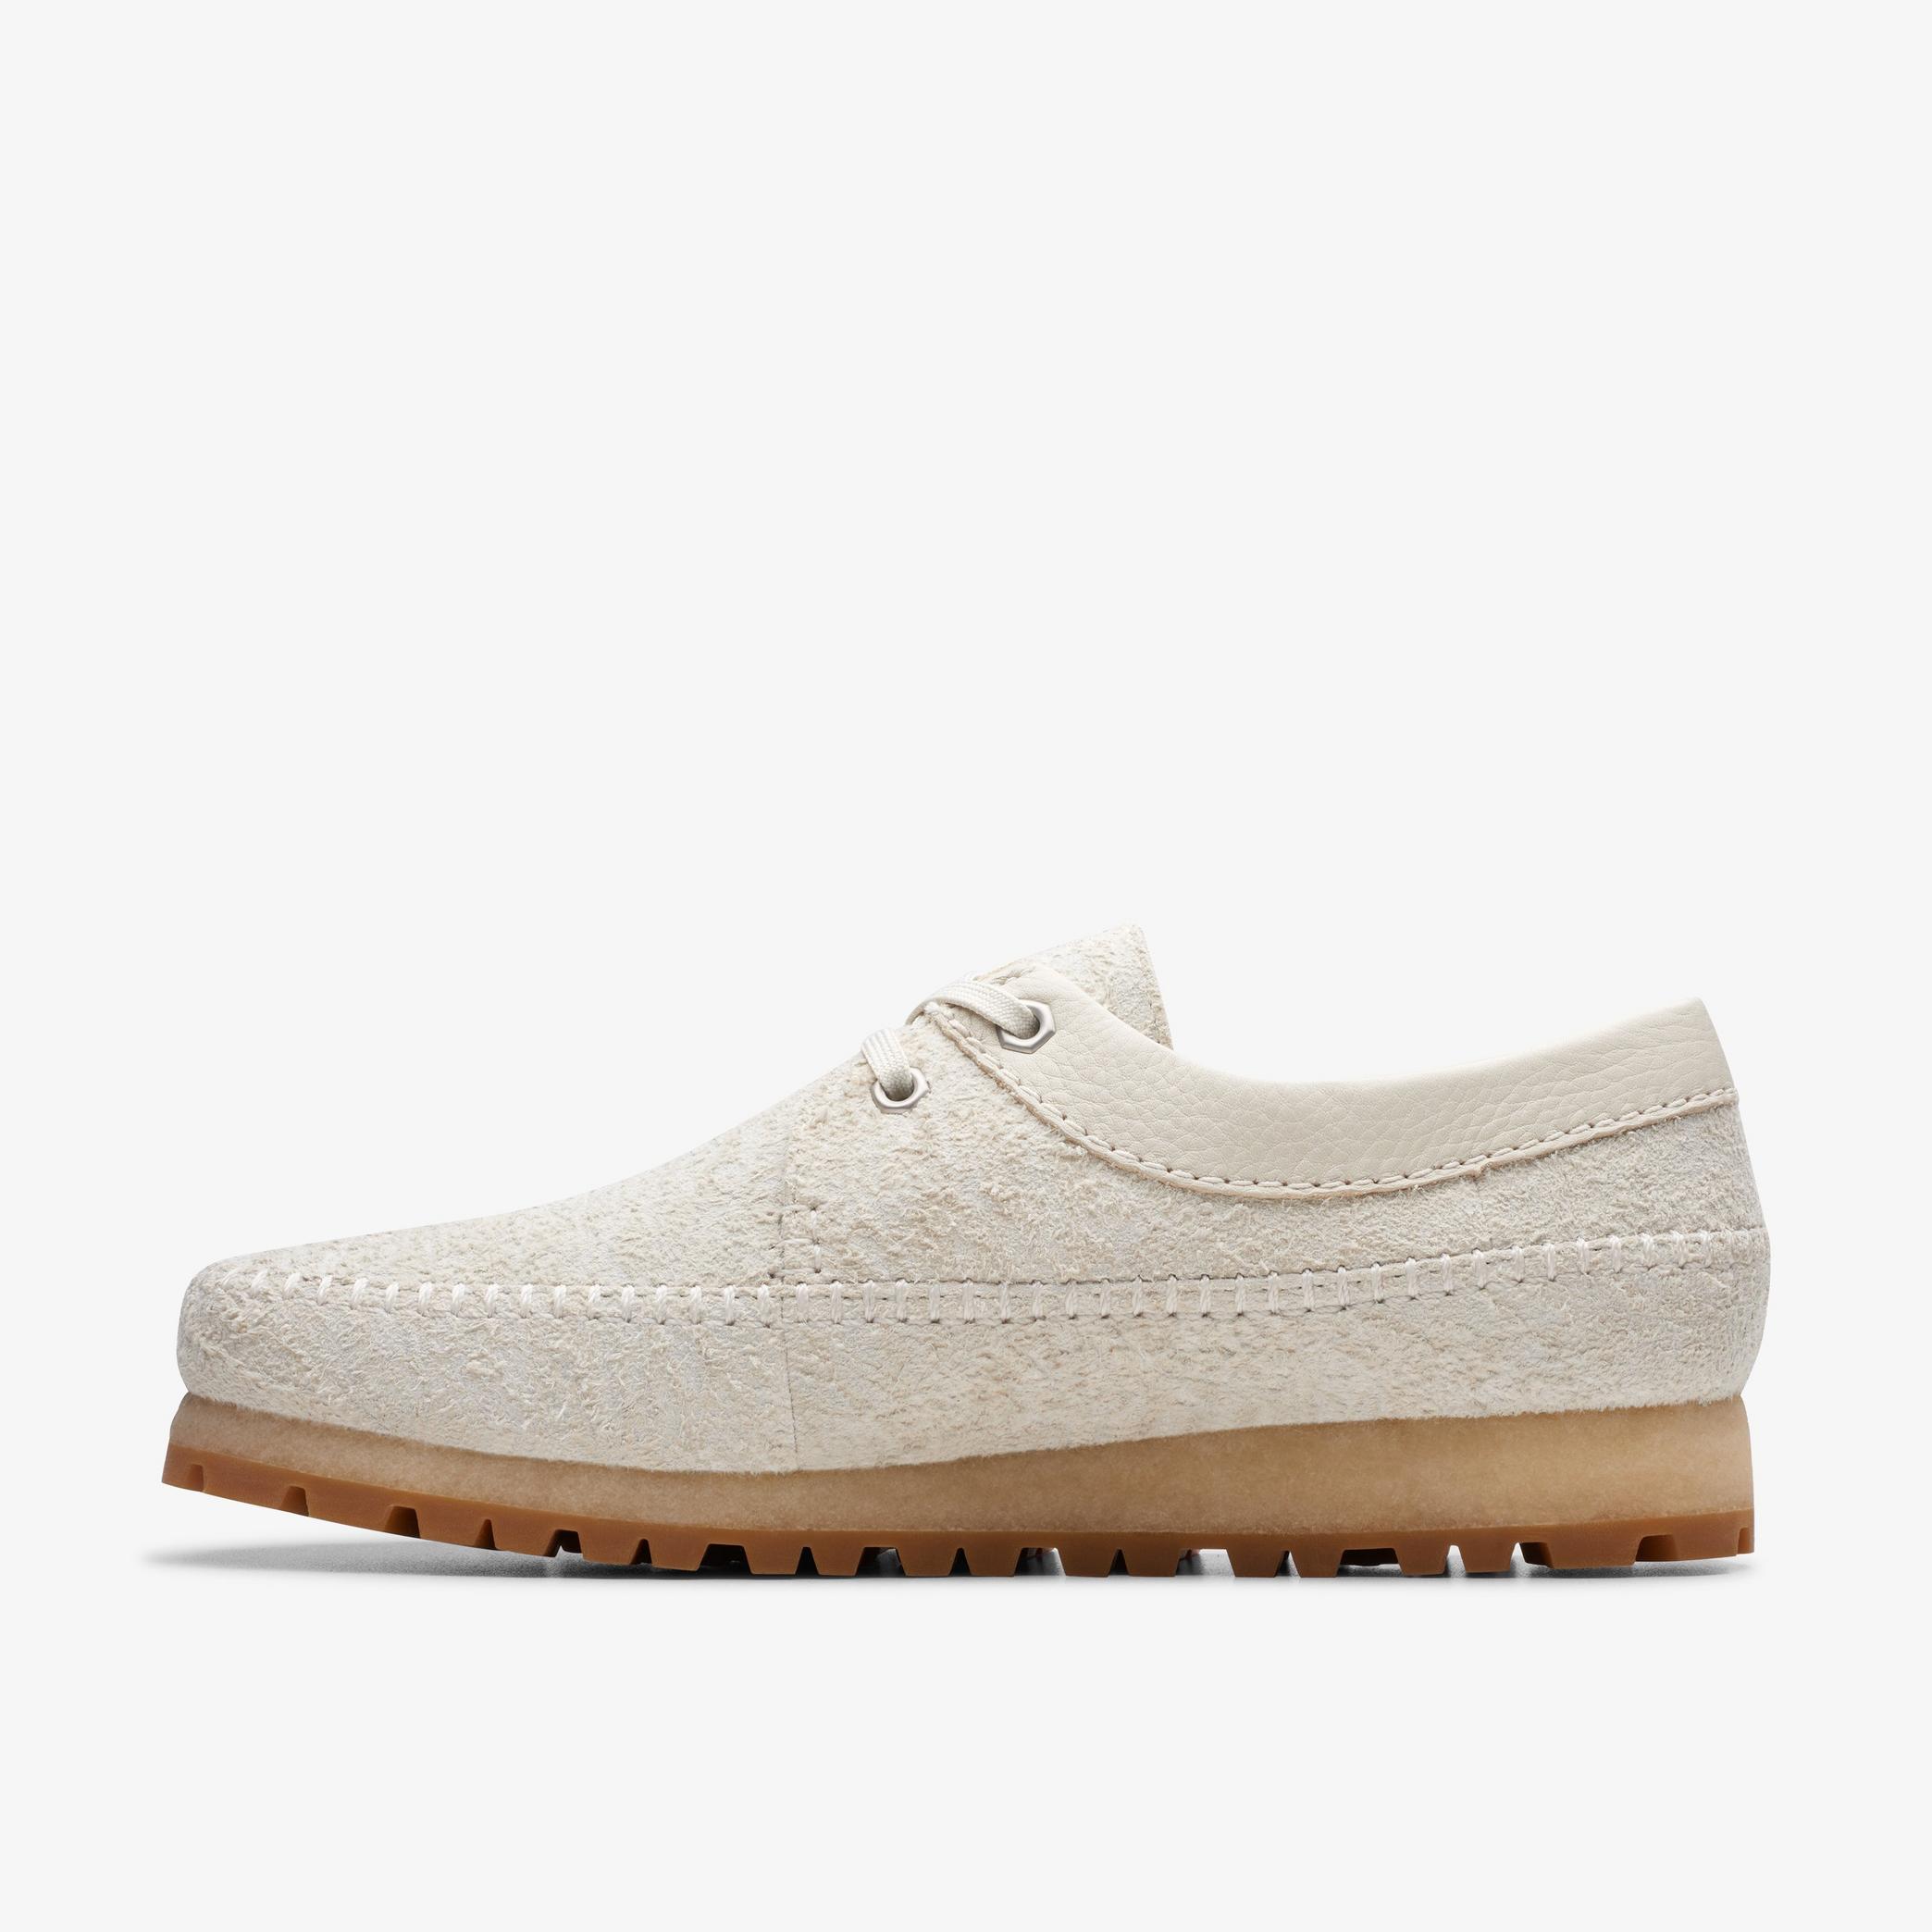 Weaver X Haven GORE-TEX White Moccasins, view 2 of 6